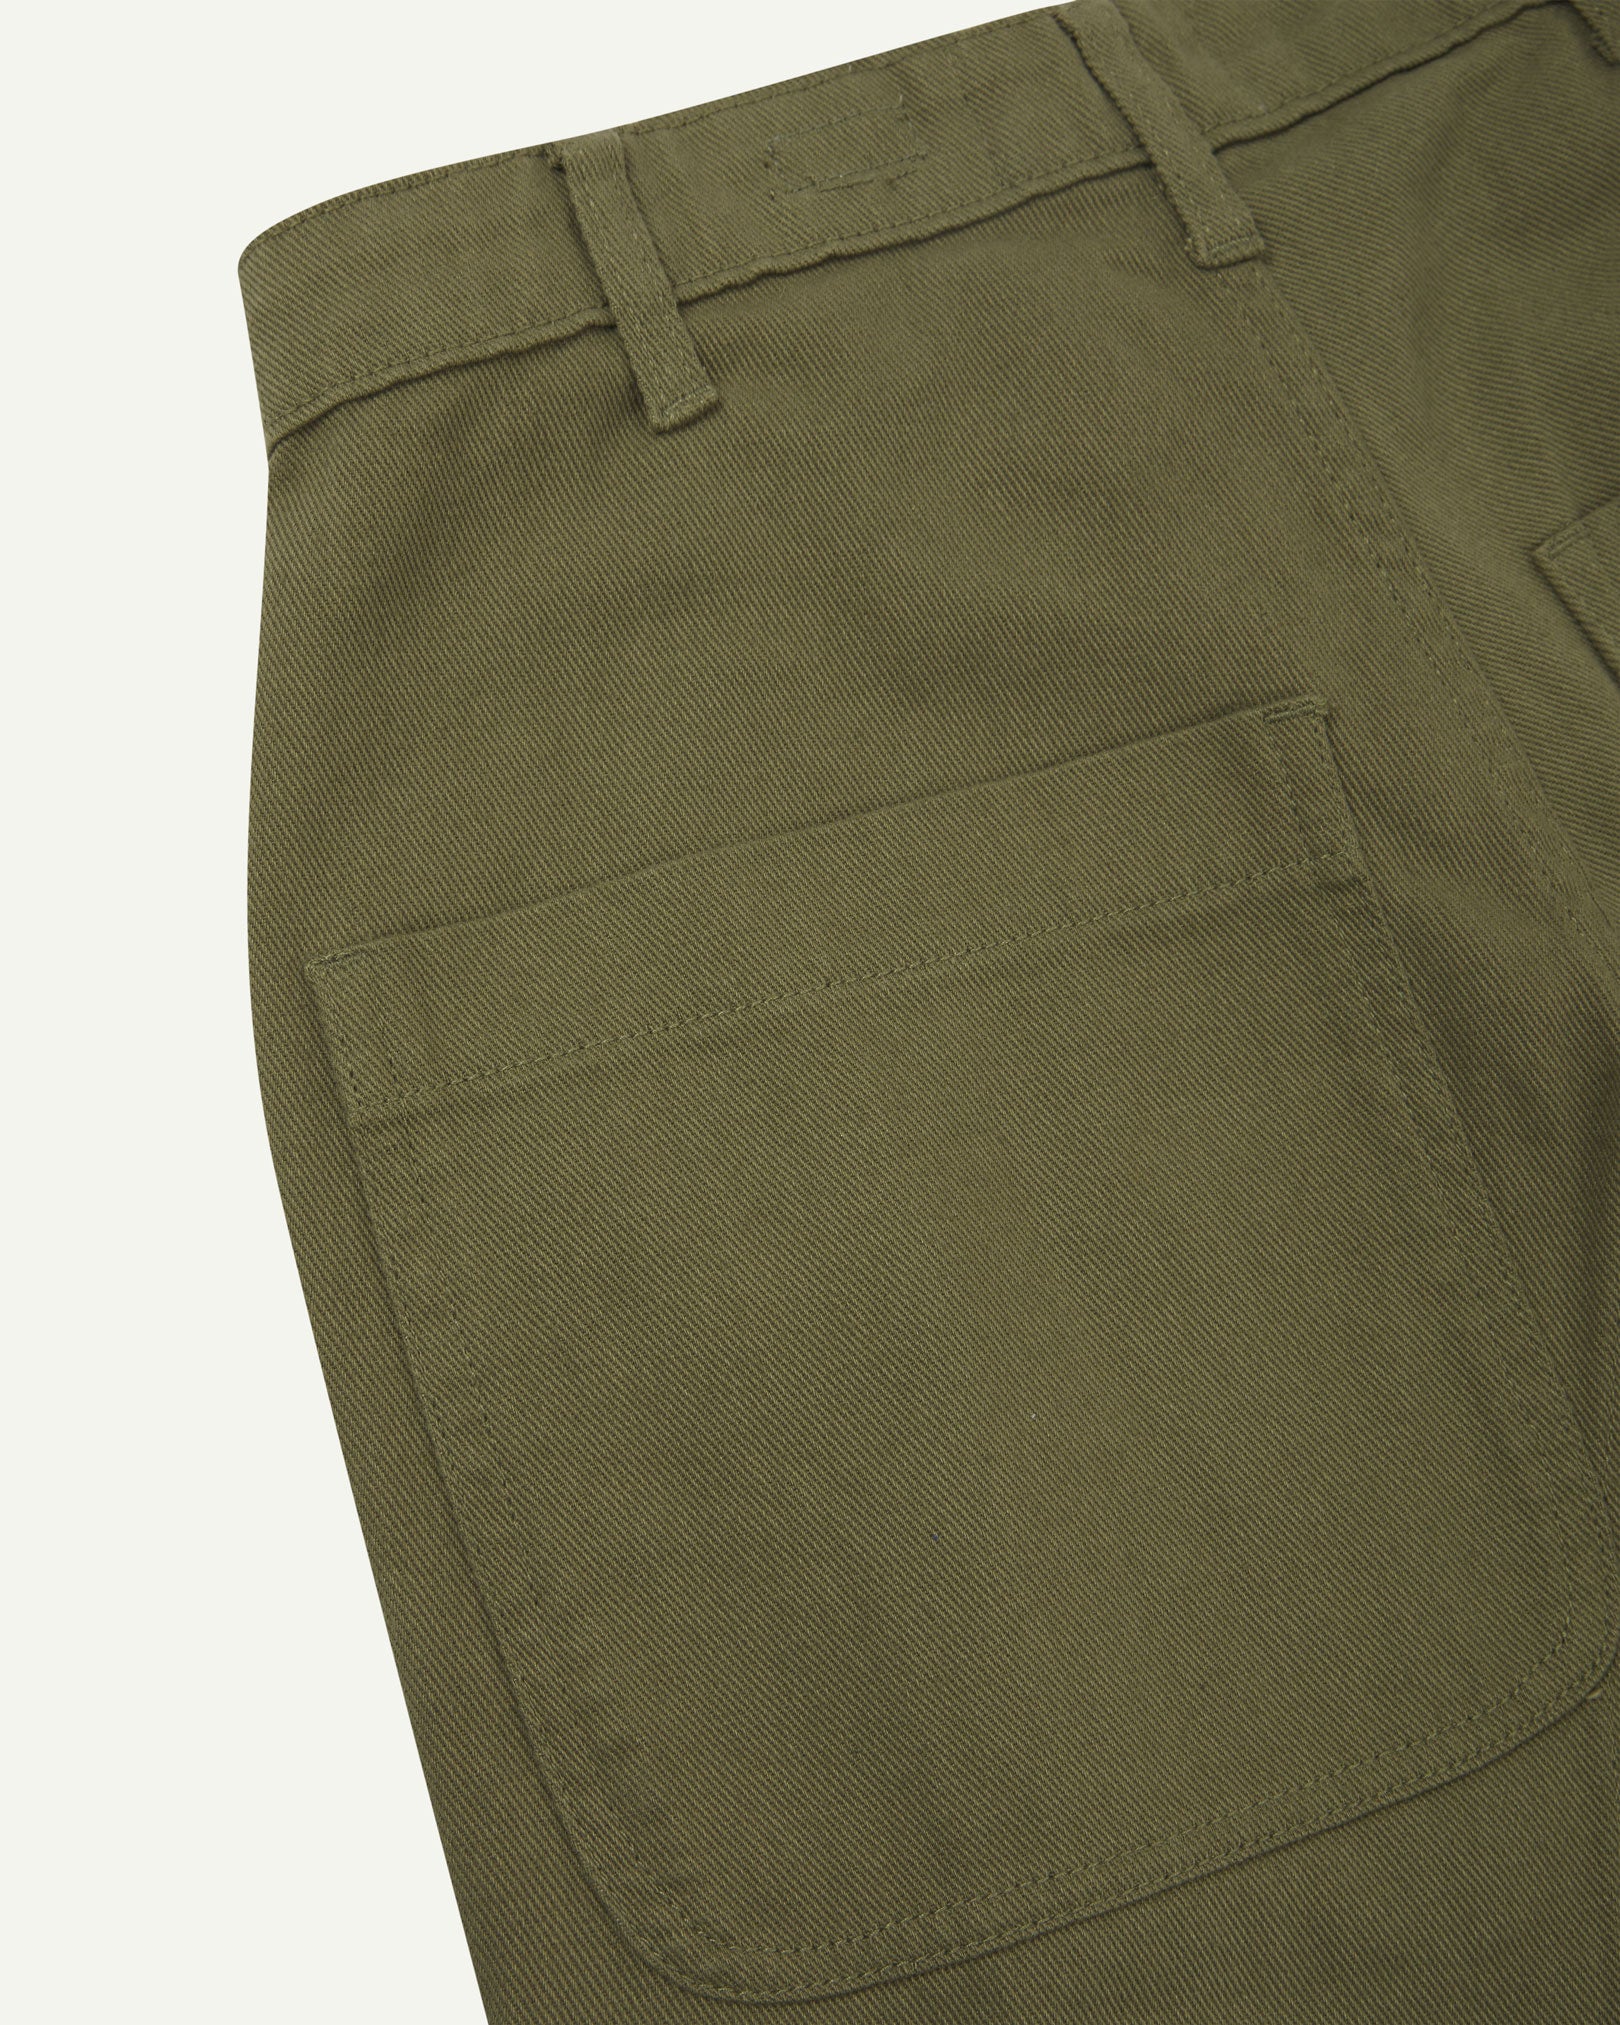 Close-up reverse view of Uskees moss green heavyweight drill work pants with focus on left rear pocket and belt loops.